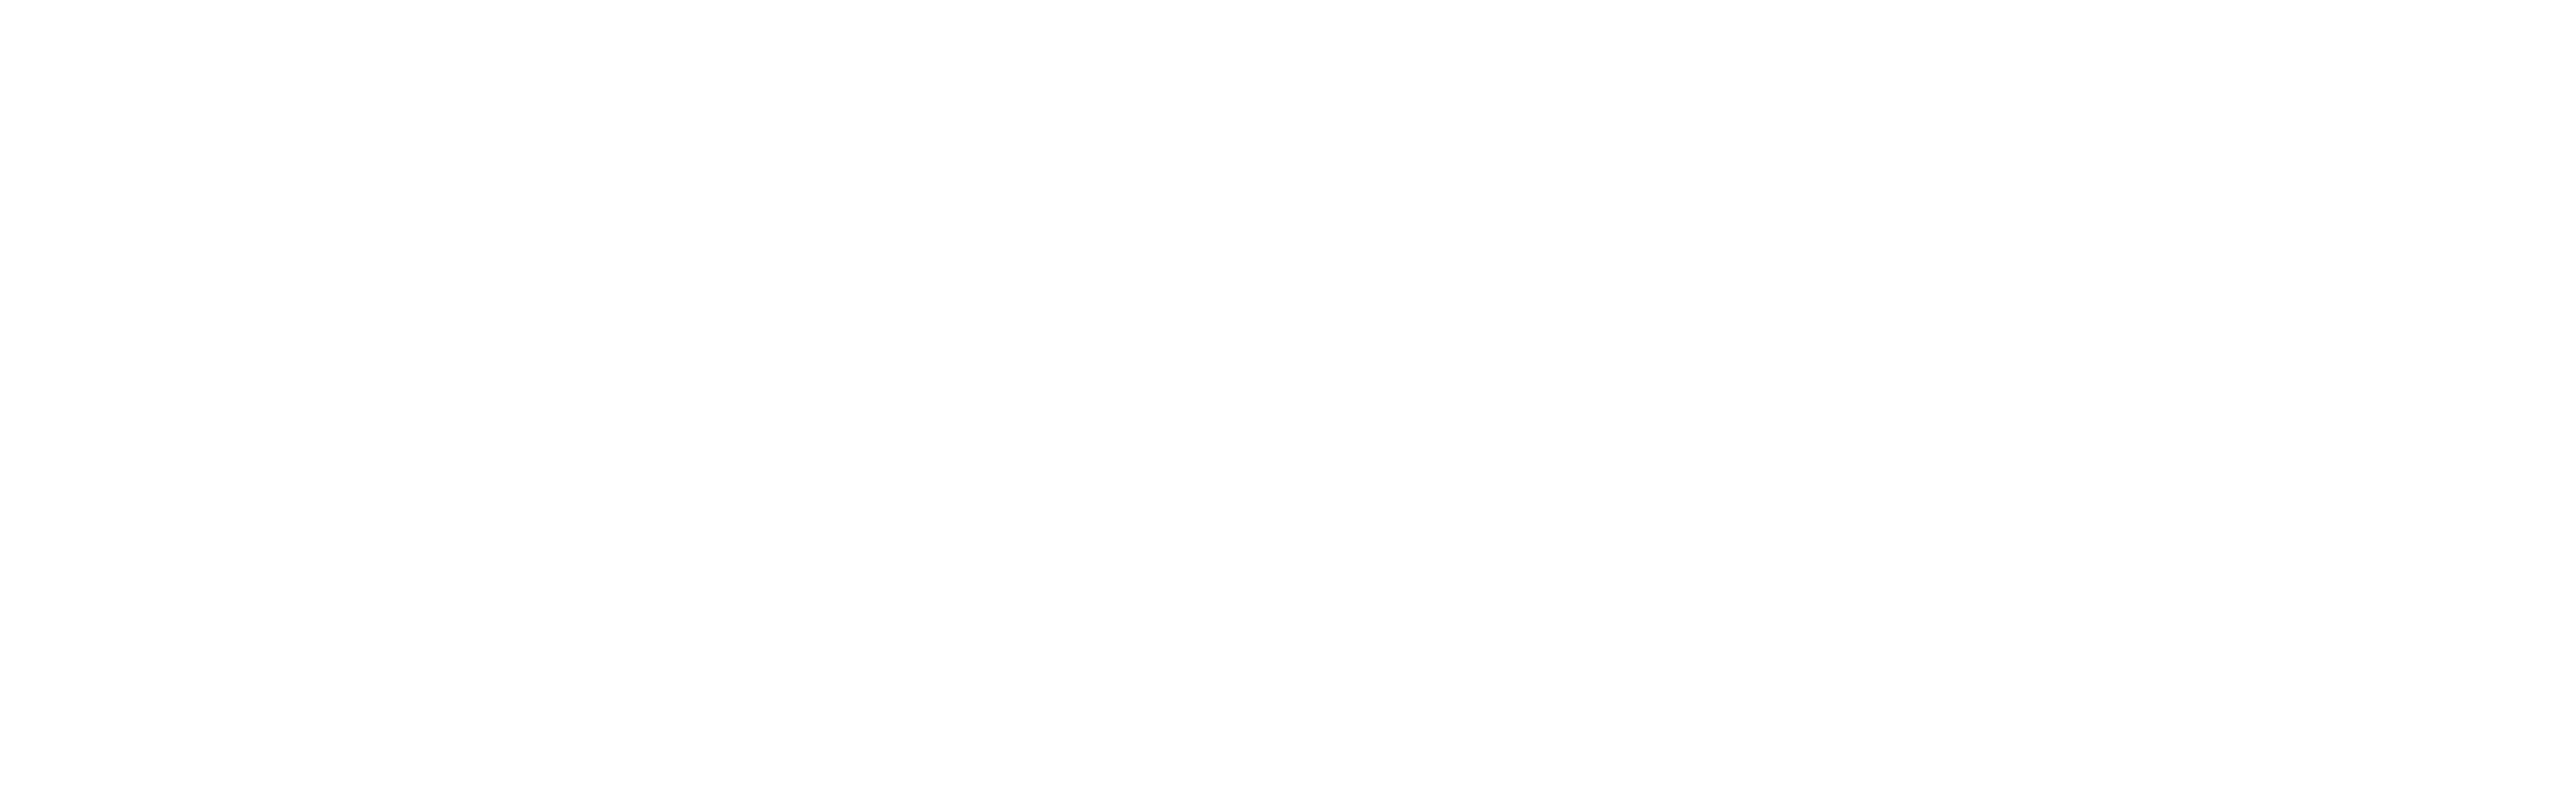 Tremone Solutions | Mergers & Aquisitions